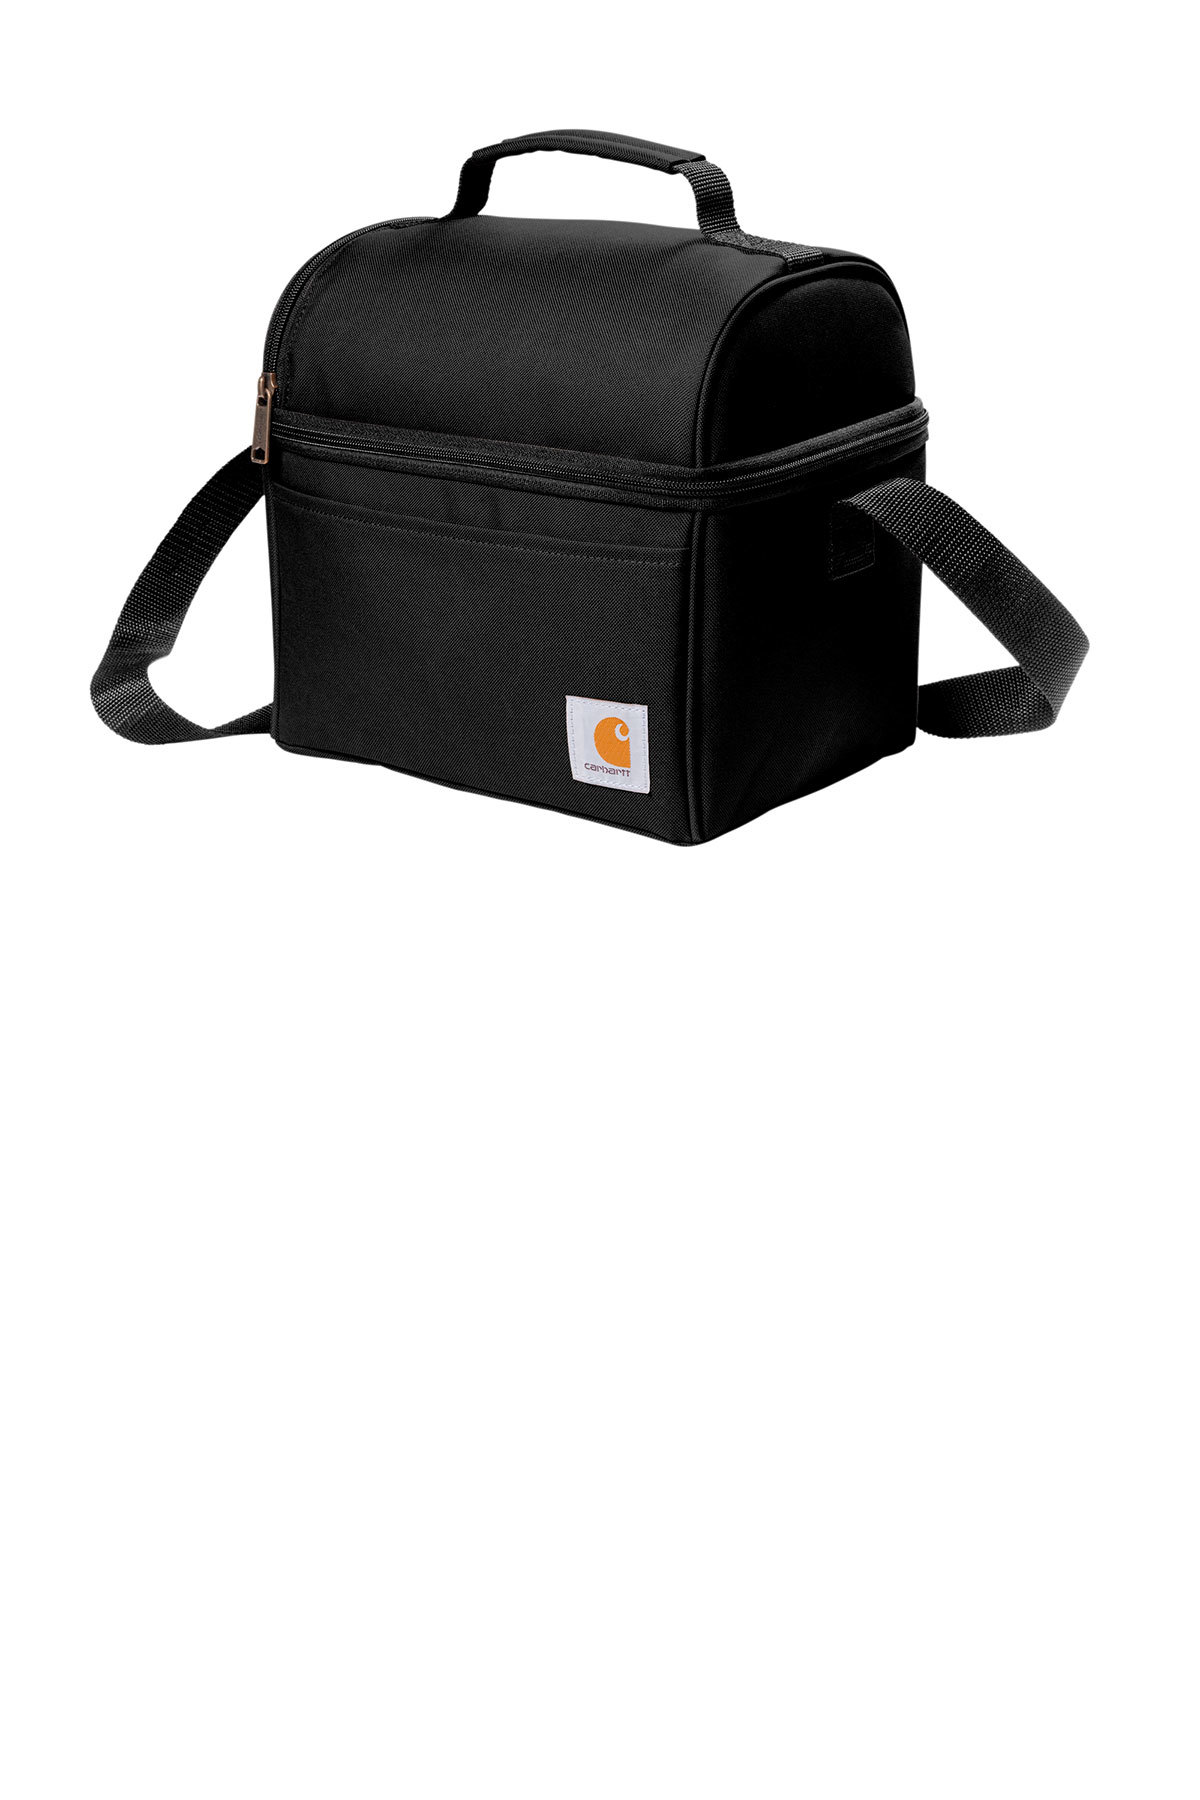 Black Leather Lunch Box, Dual Compartments, Personalized, Unisex